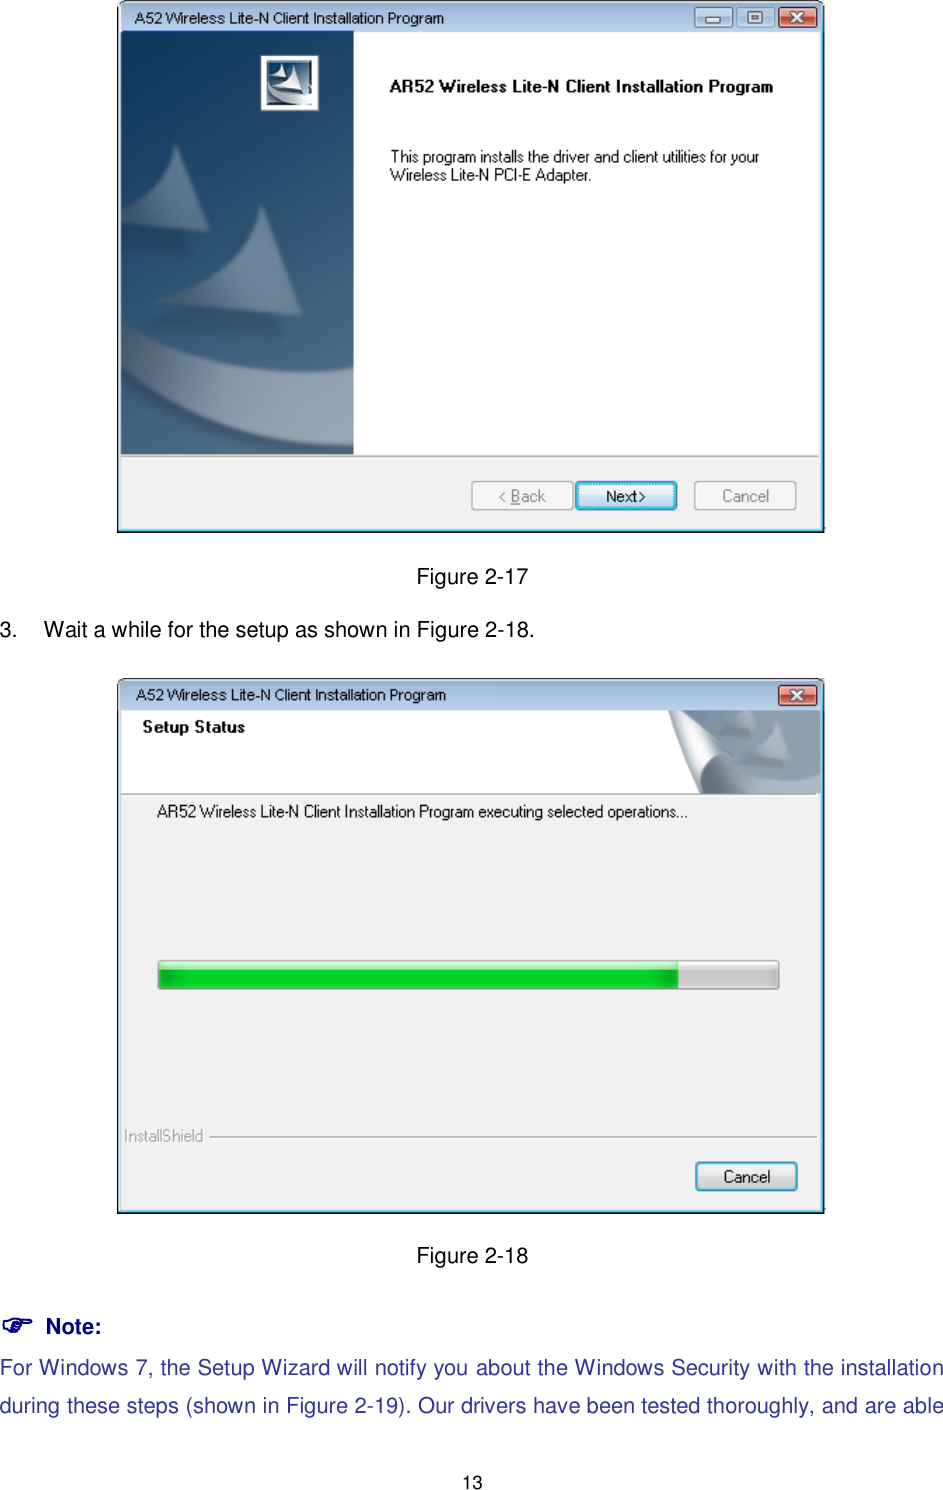  13  Figure 2-17 3.  Wait a while for the setup as shown in Figure 2-18.  Figure 2-18  Note: For Windows 7, the Setup Wizard will notify you about the Windows Security with the installation during these steps (shown in Figure 2-19). Our drivers have been tested thoroughly, and are able 